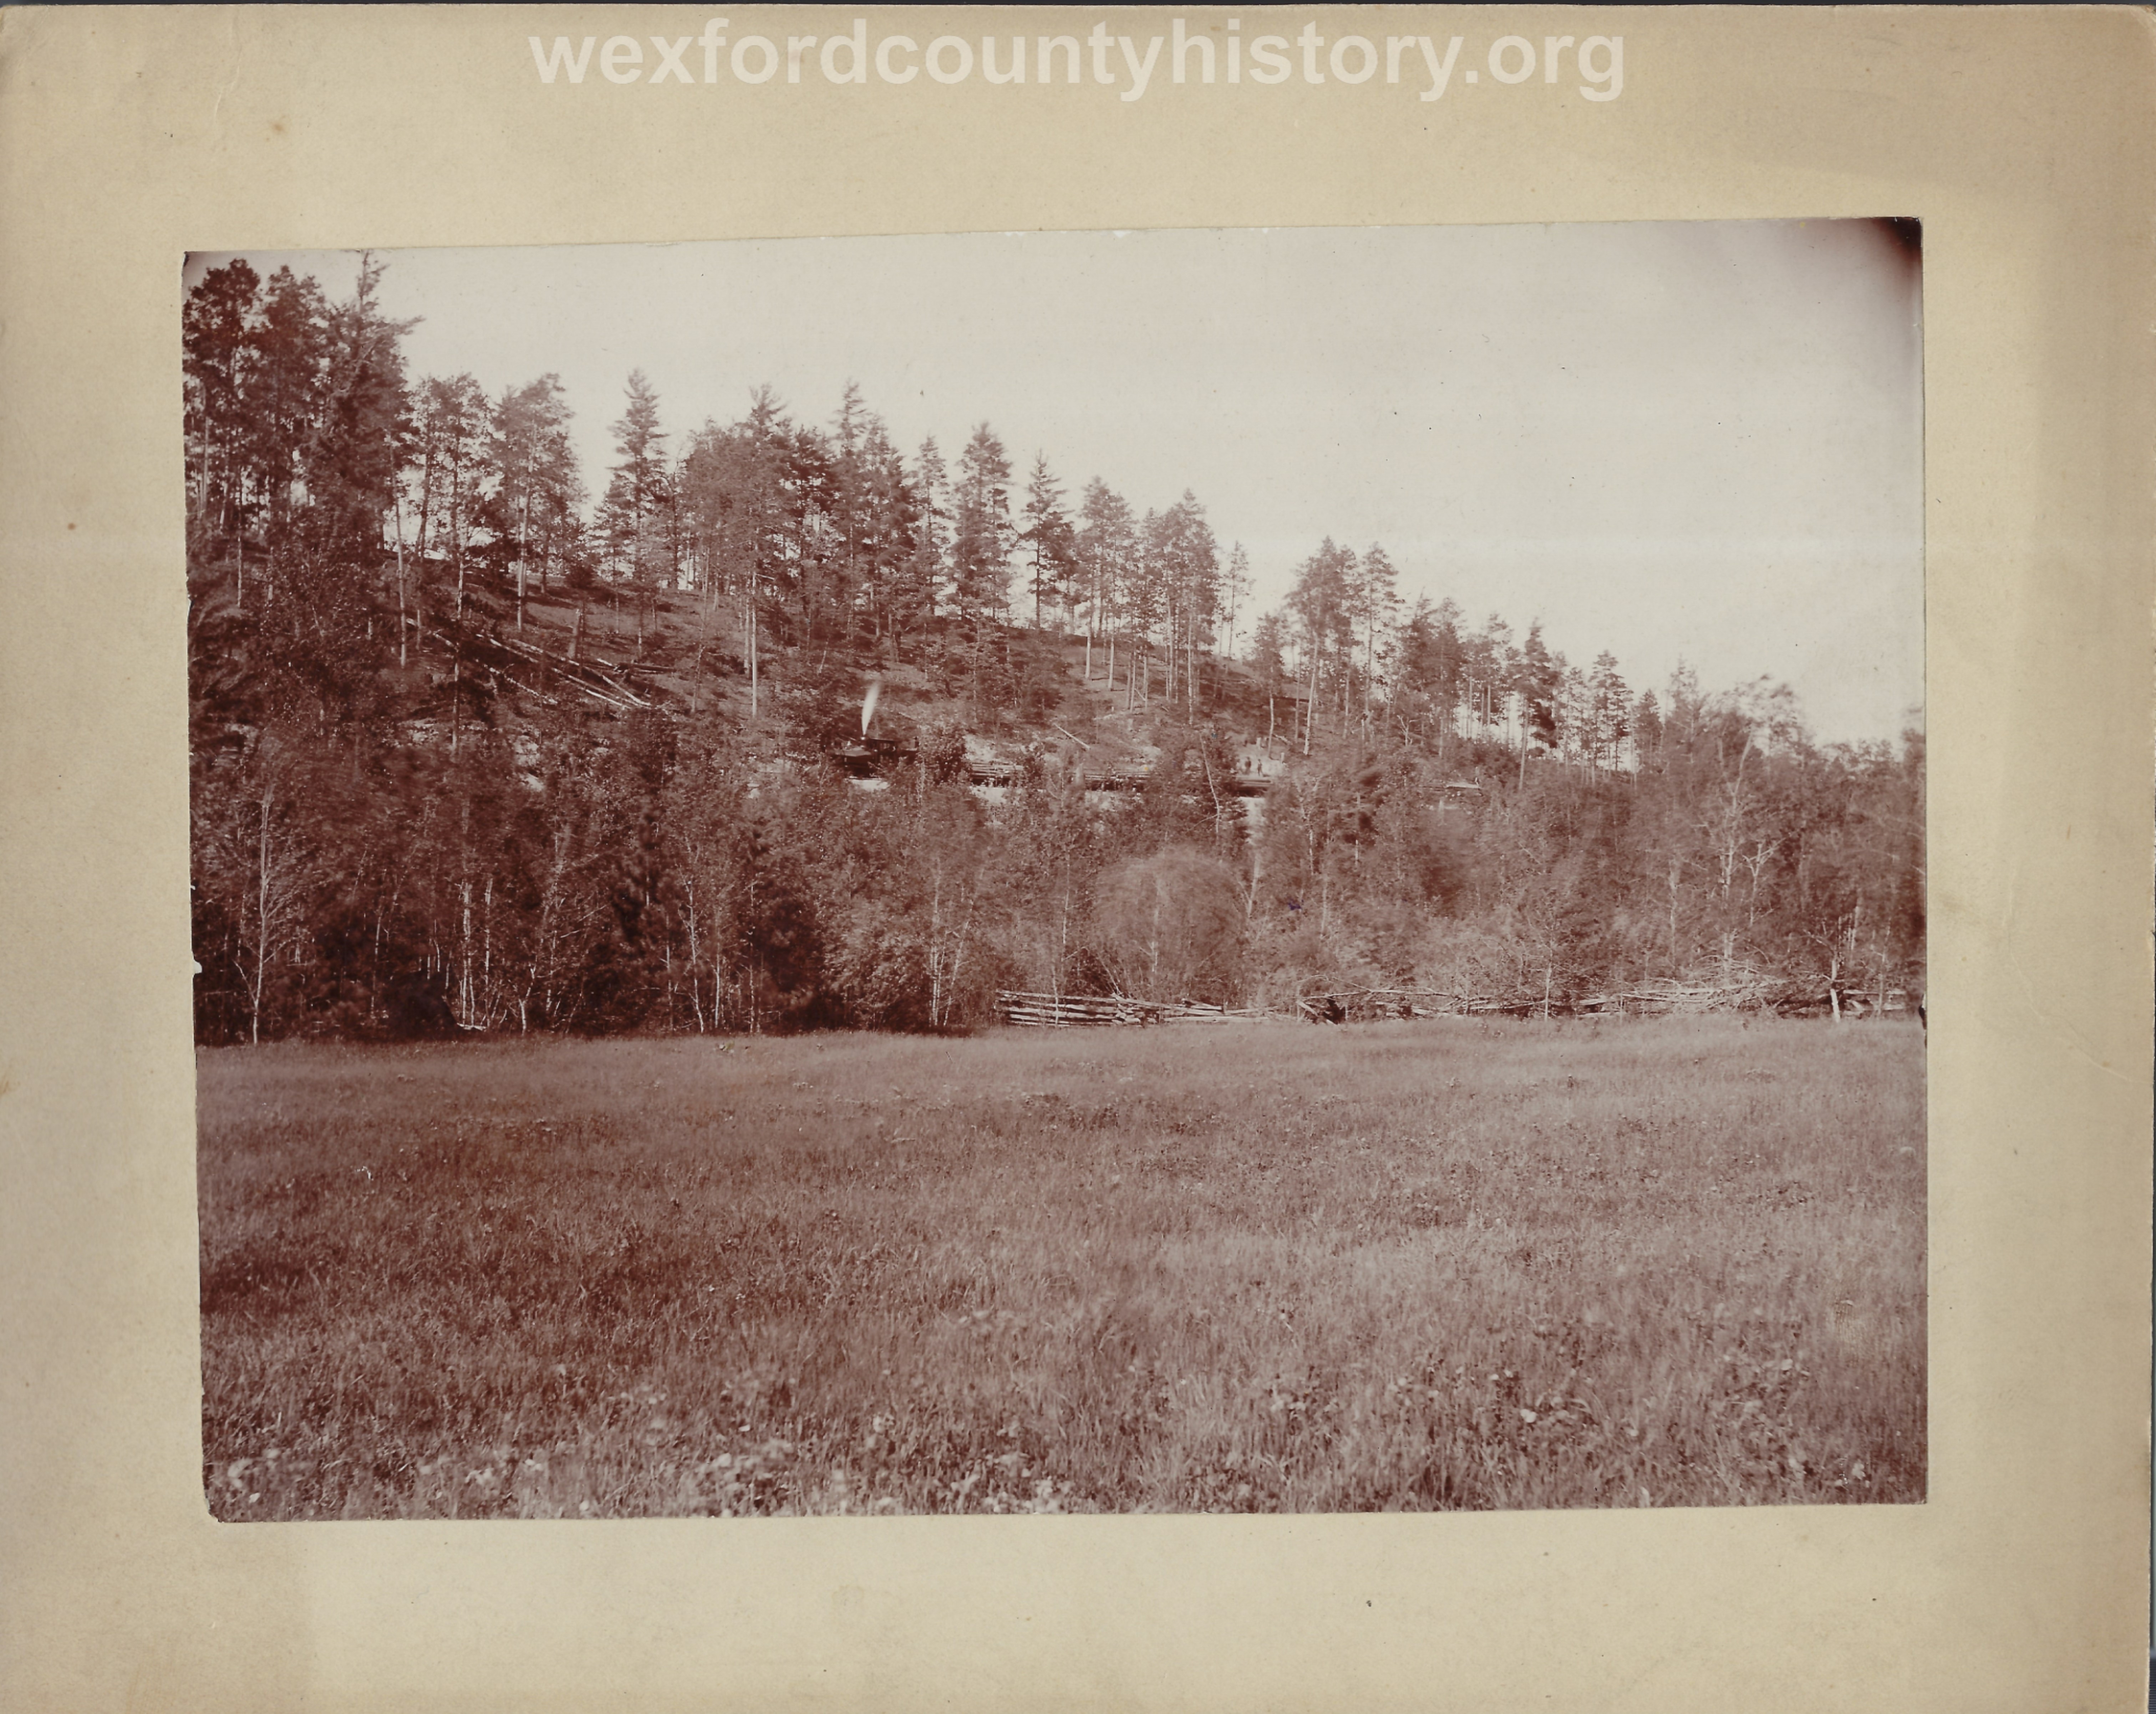 Cadillac-Lumber-Hill-of-Logs-In-The-Wexford-County-Countryside-1